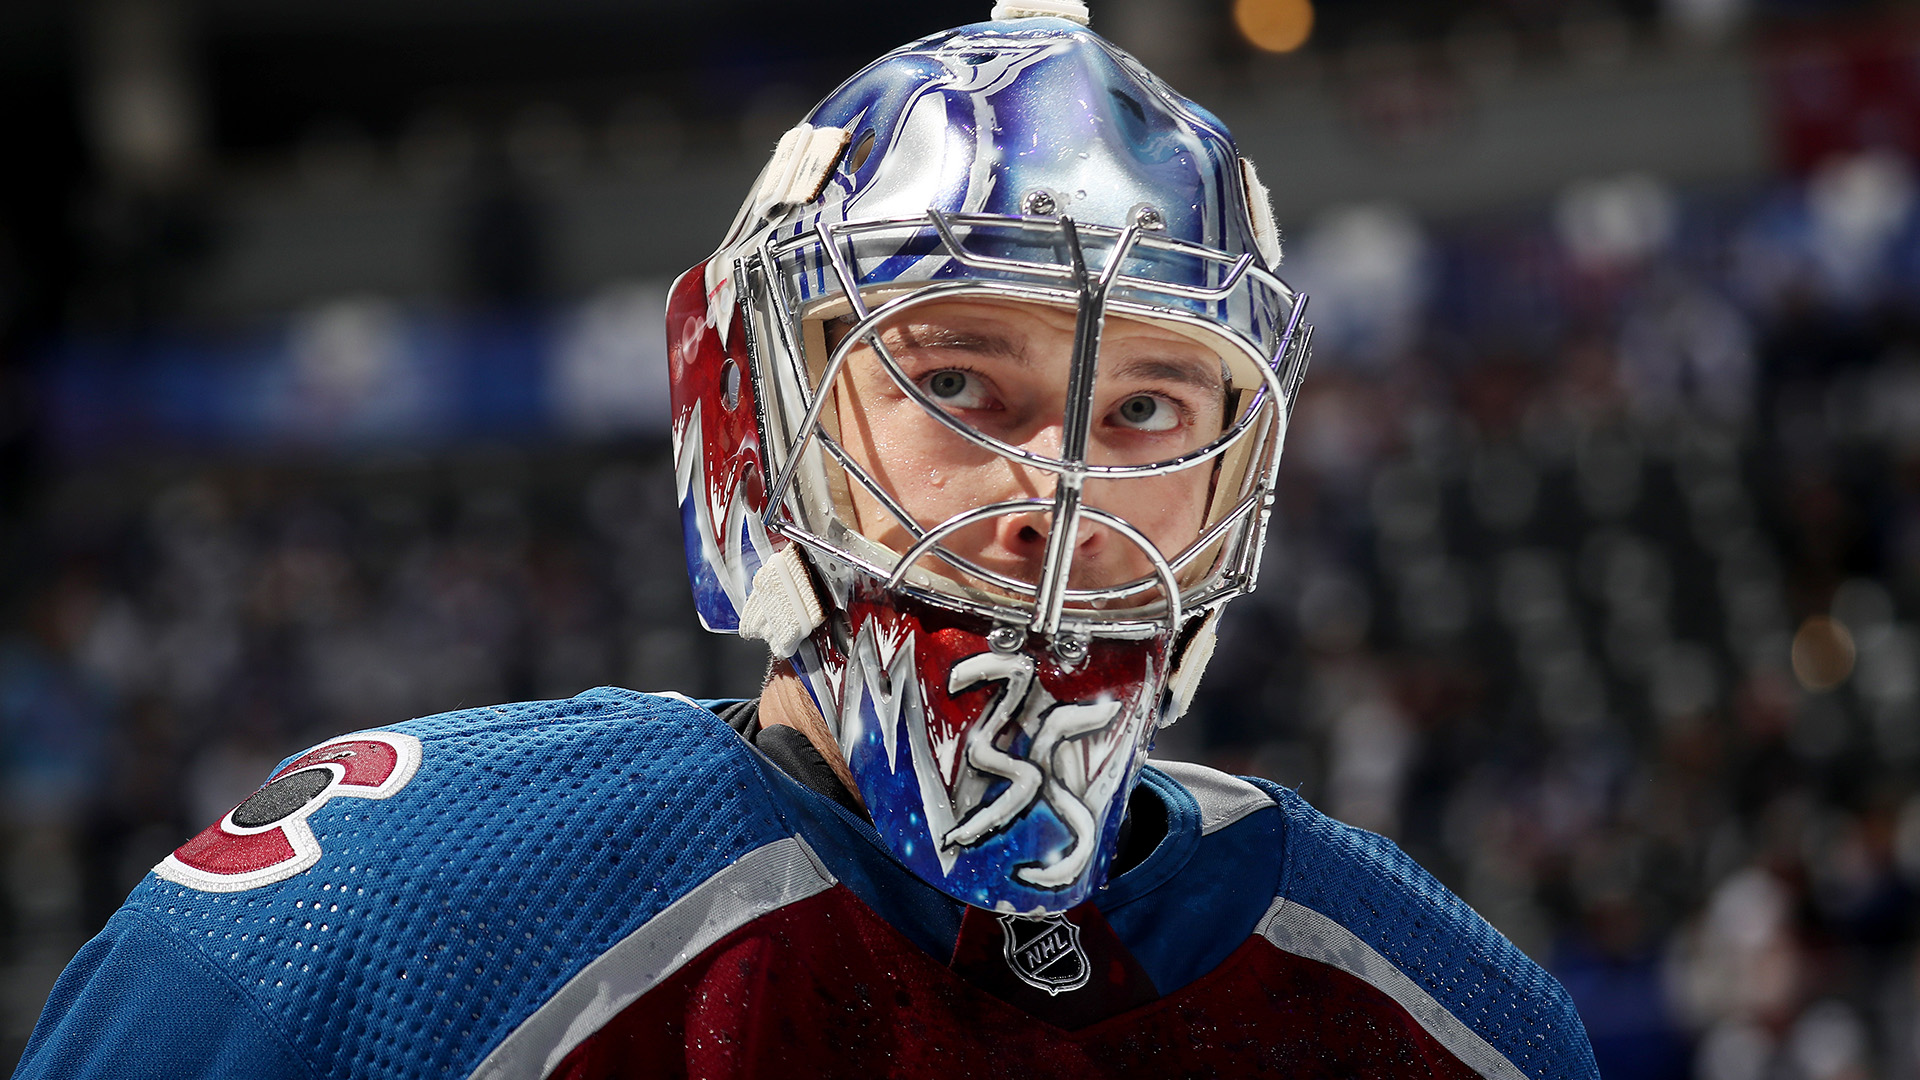 Goaltender Darcy Kuemper of the Colorado Avalanche looks on prior to Game One of the First Round of the 2022 Stanley Cup Playoffs against the Nashville Predators at Ball Arena on May 3, 2022.